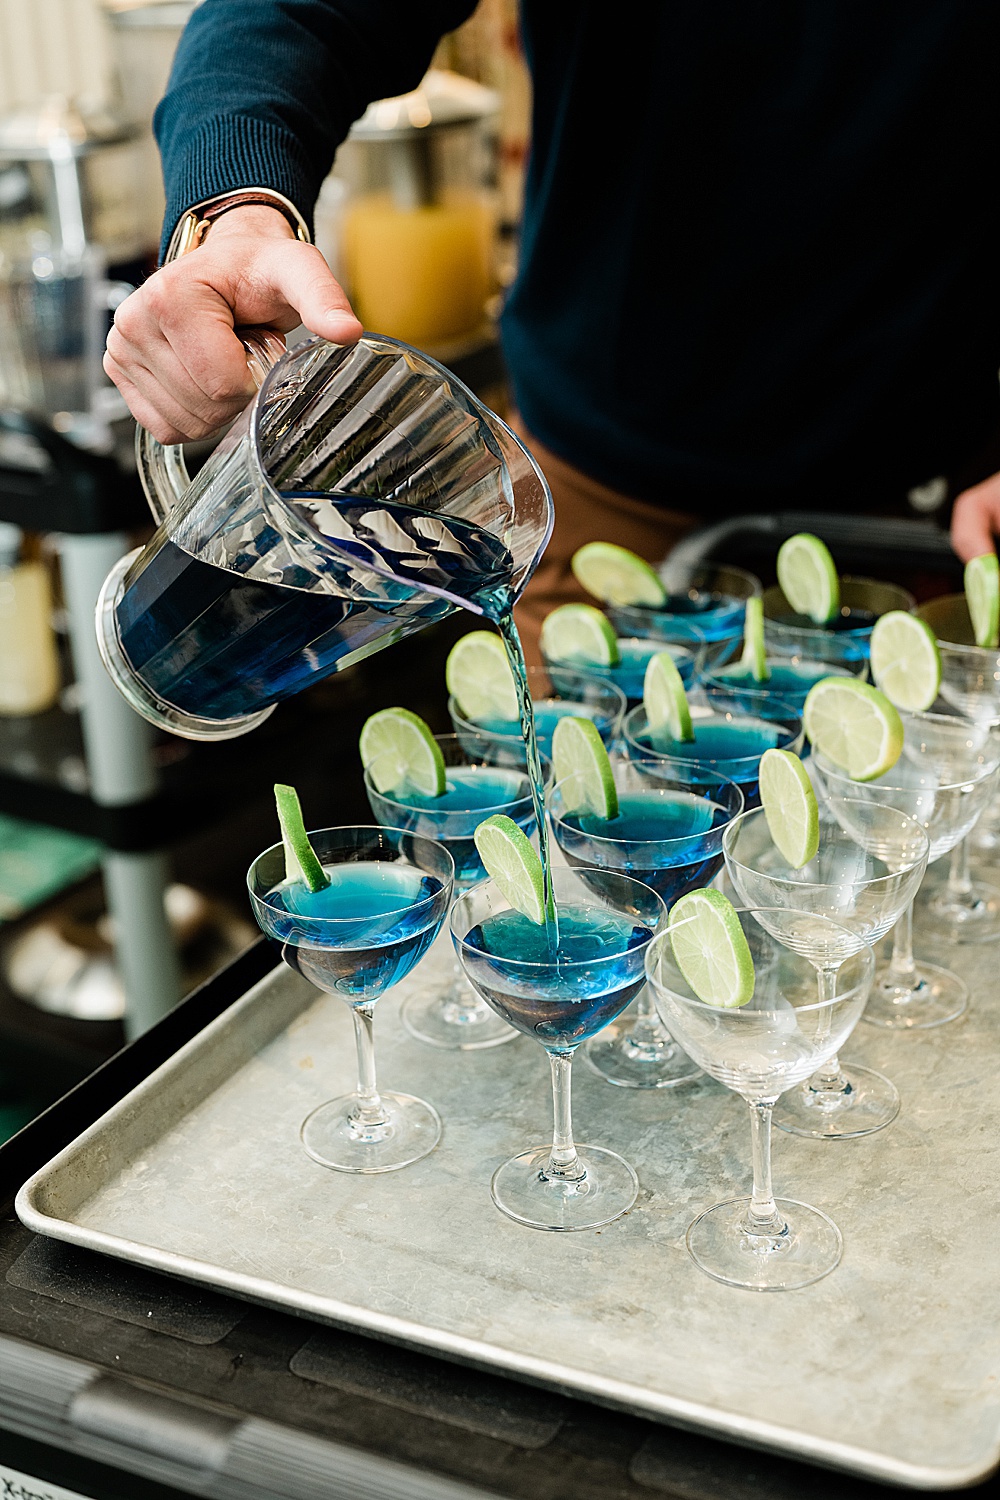 East Lansing's Graduate Hotel School Spirits Dinner, close up photo a man pouring blue drinks into martini glasses, by Allie Siarto & Co. Photography, Lansing commercial photographer